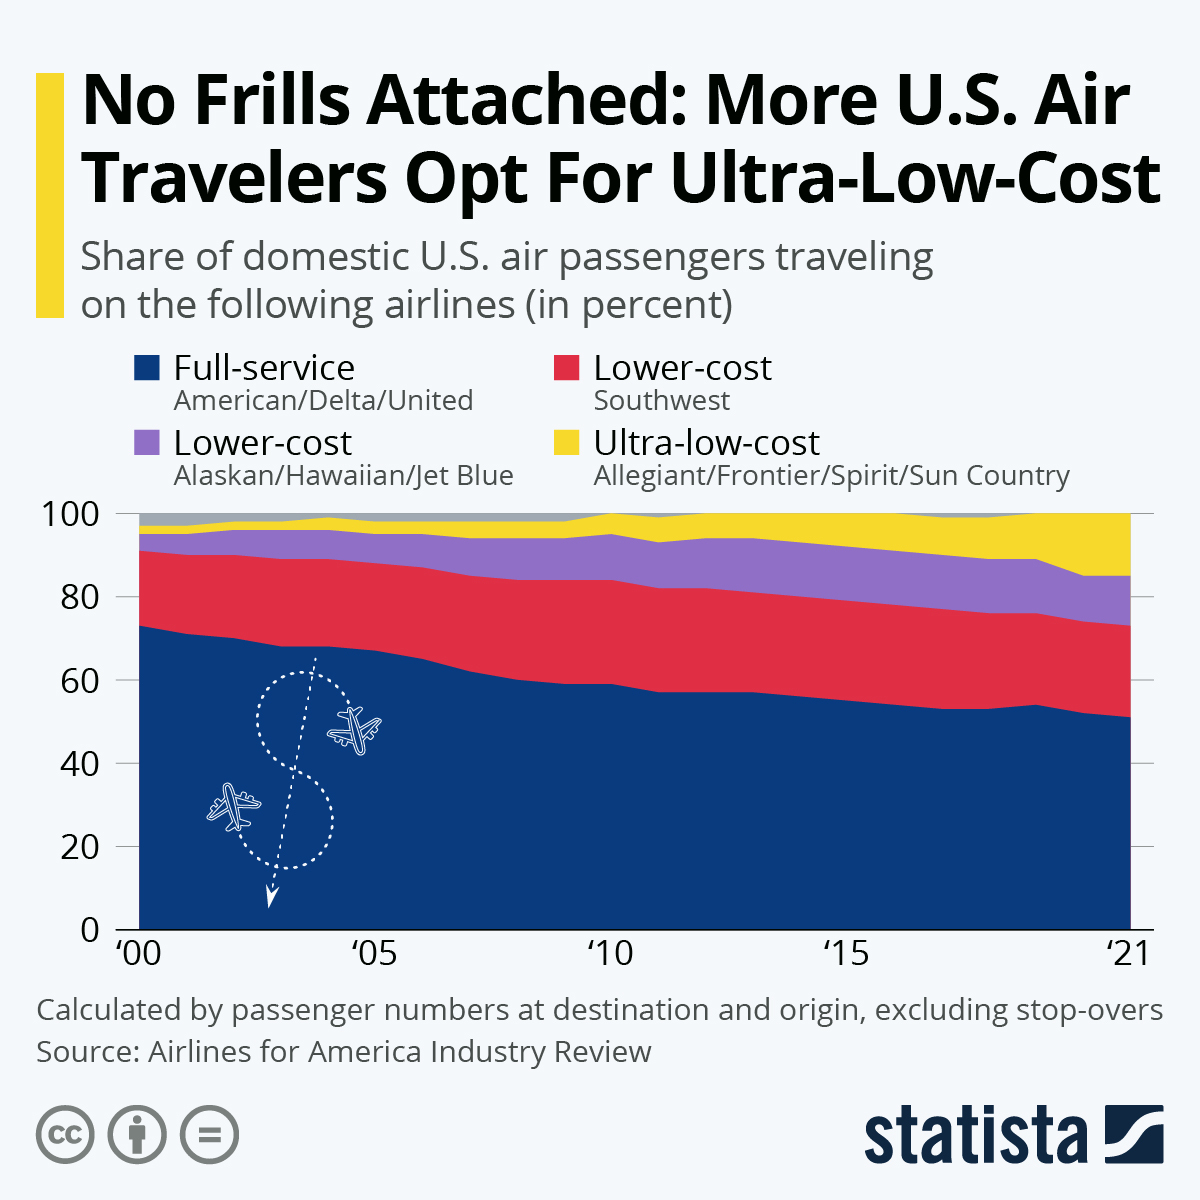 No Frills Attached: More U.S. Air Travelers Opt For Ultra-Low-Cost